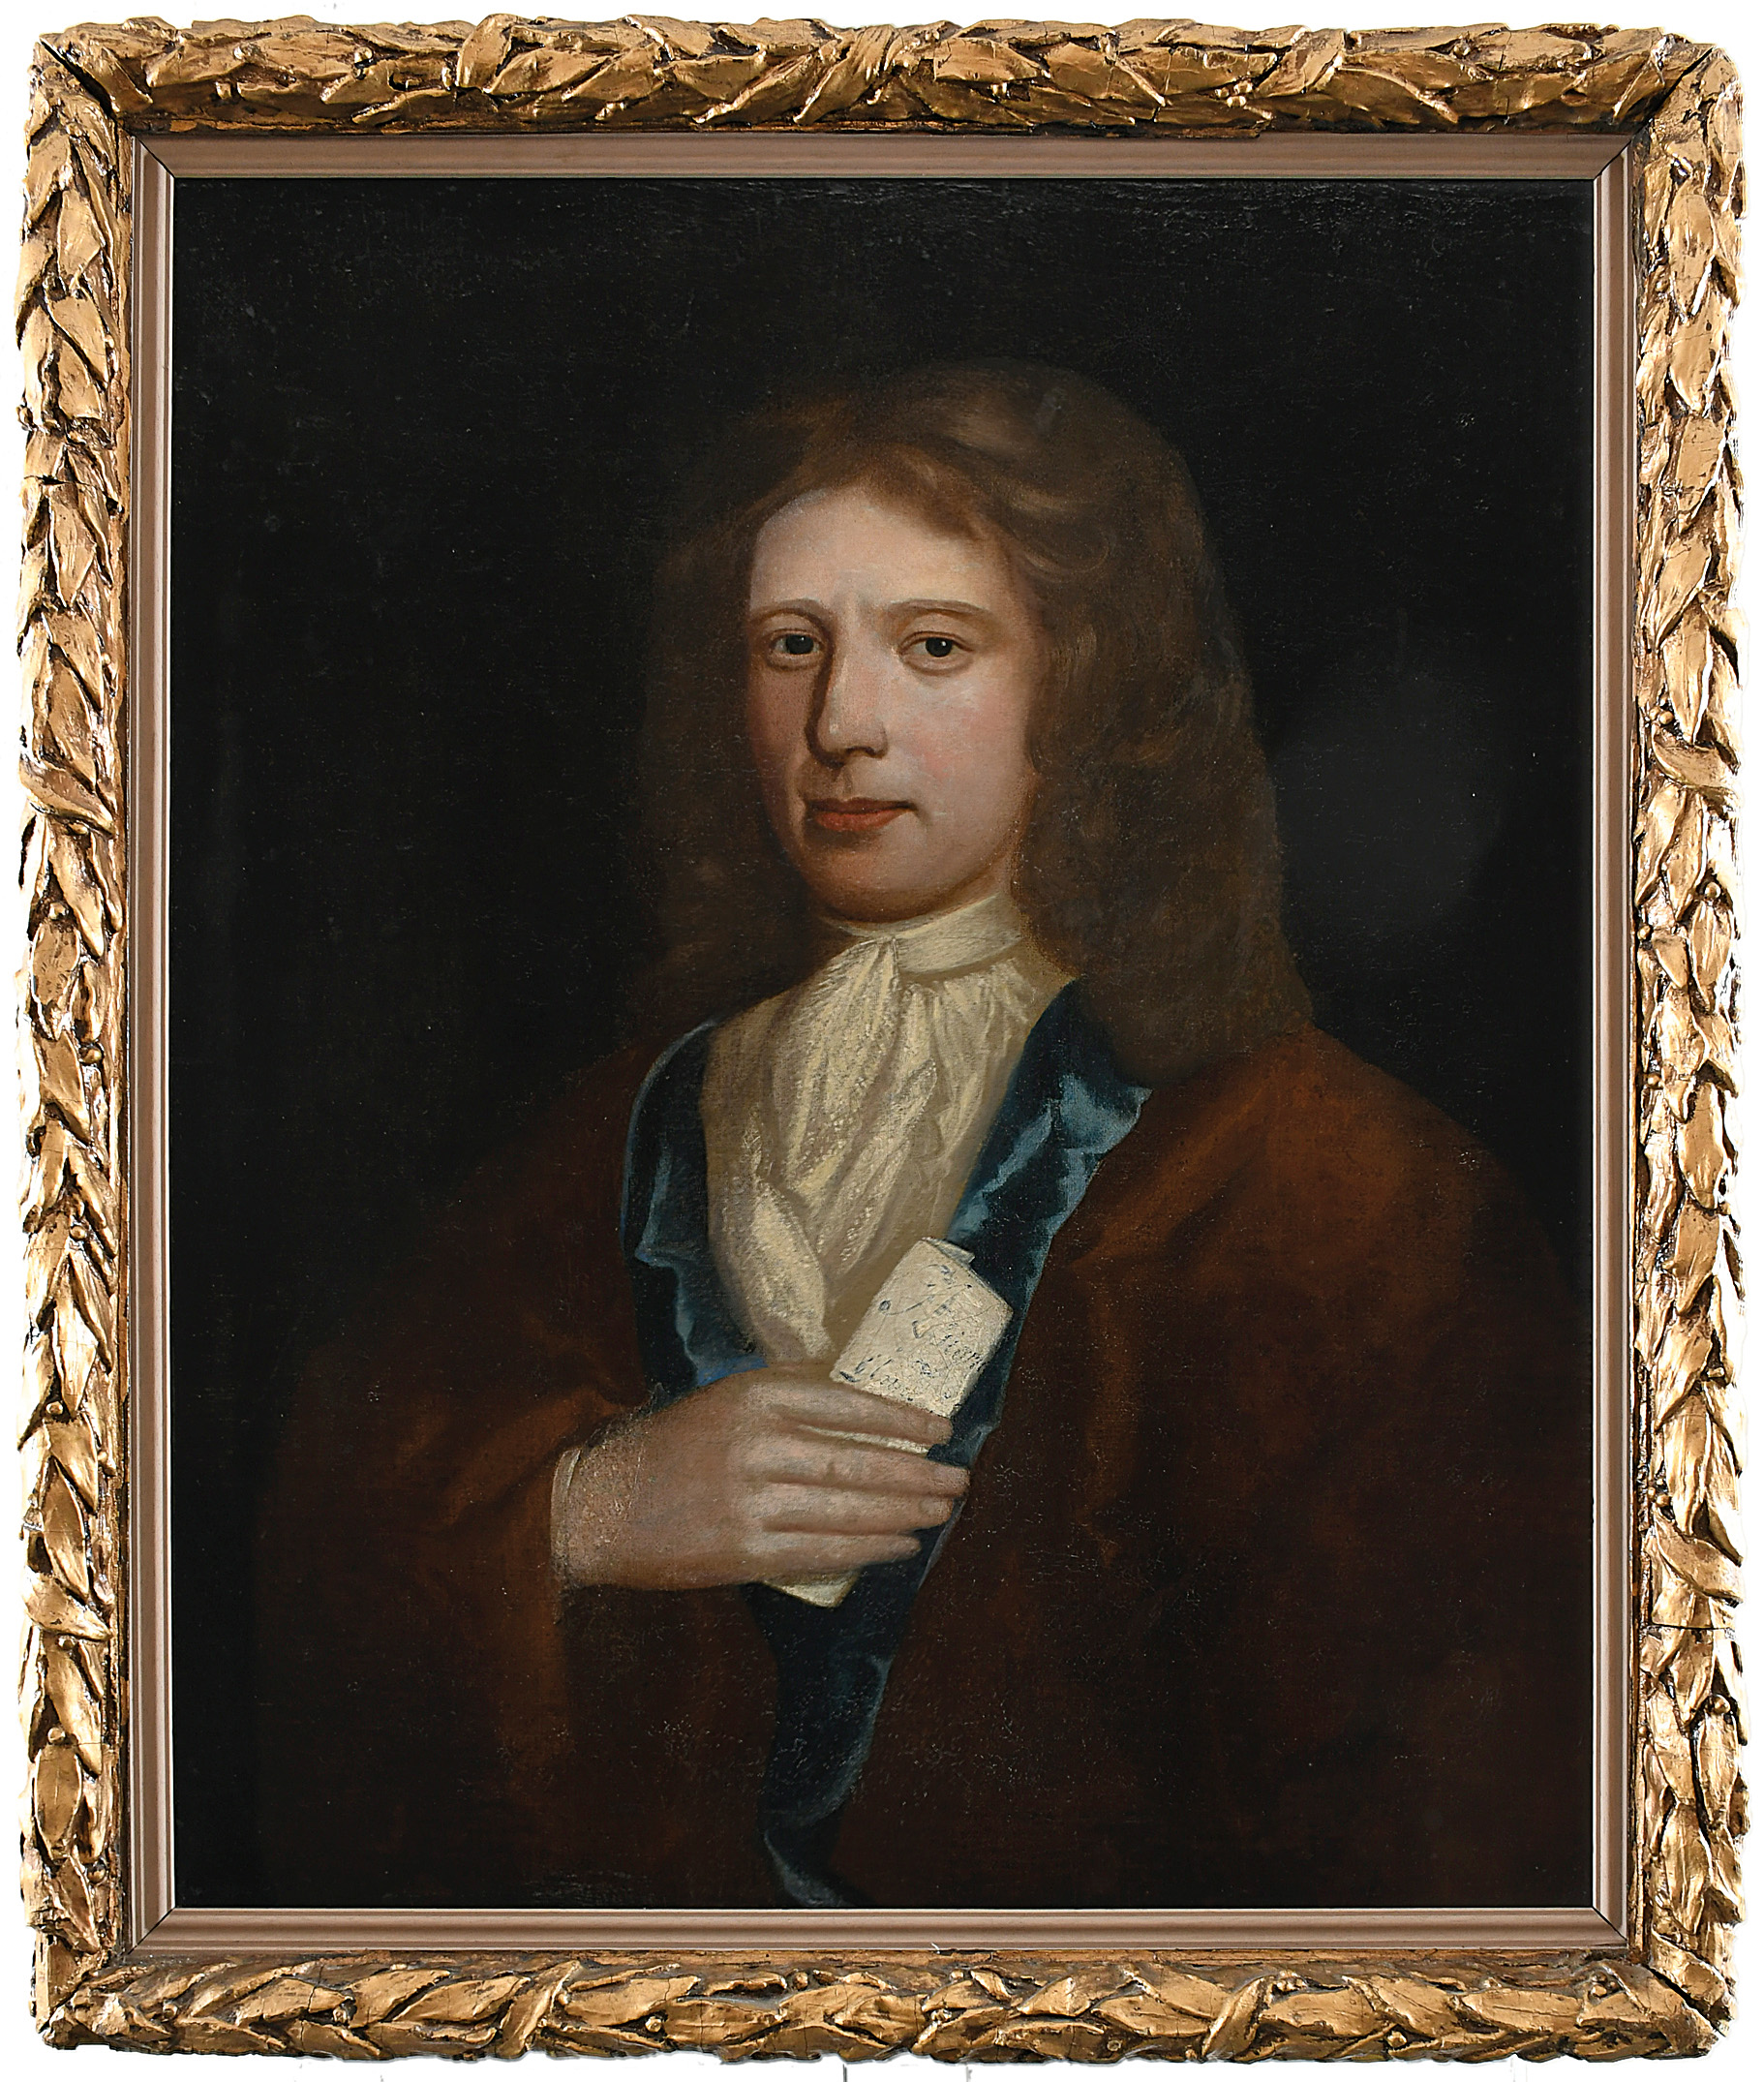 ENGLISH SCHOOL EARLY 18TH CENTURY Portrait of a gentleman, half-length, wearing a brown coat with